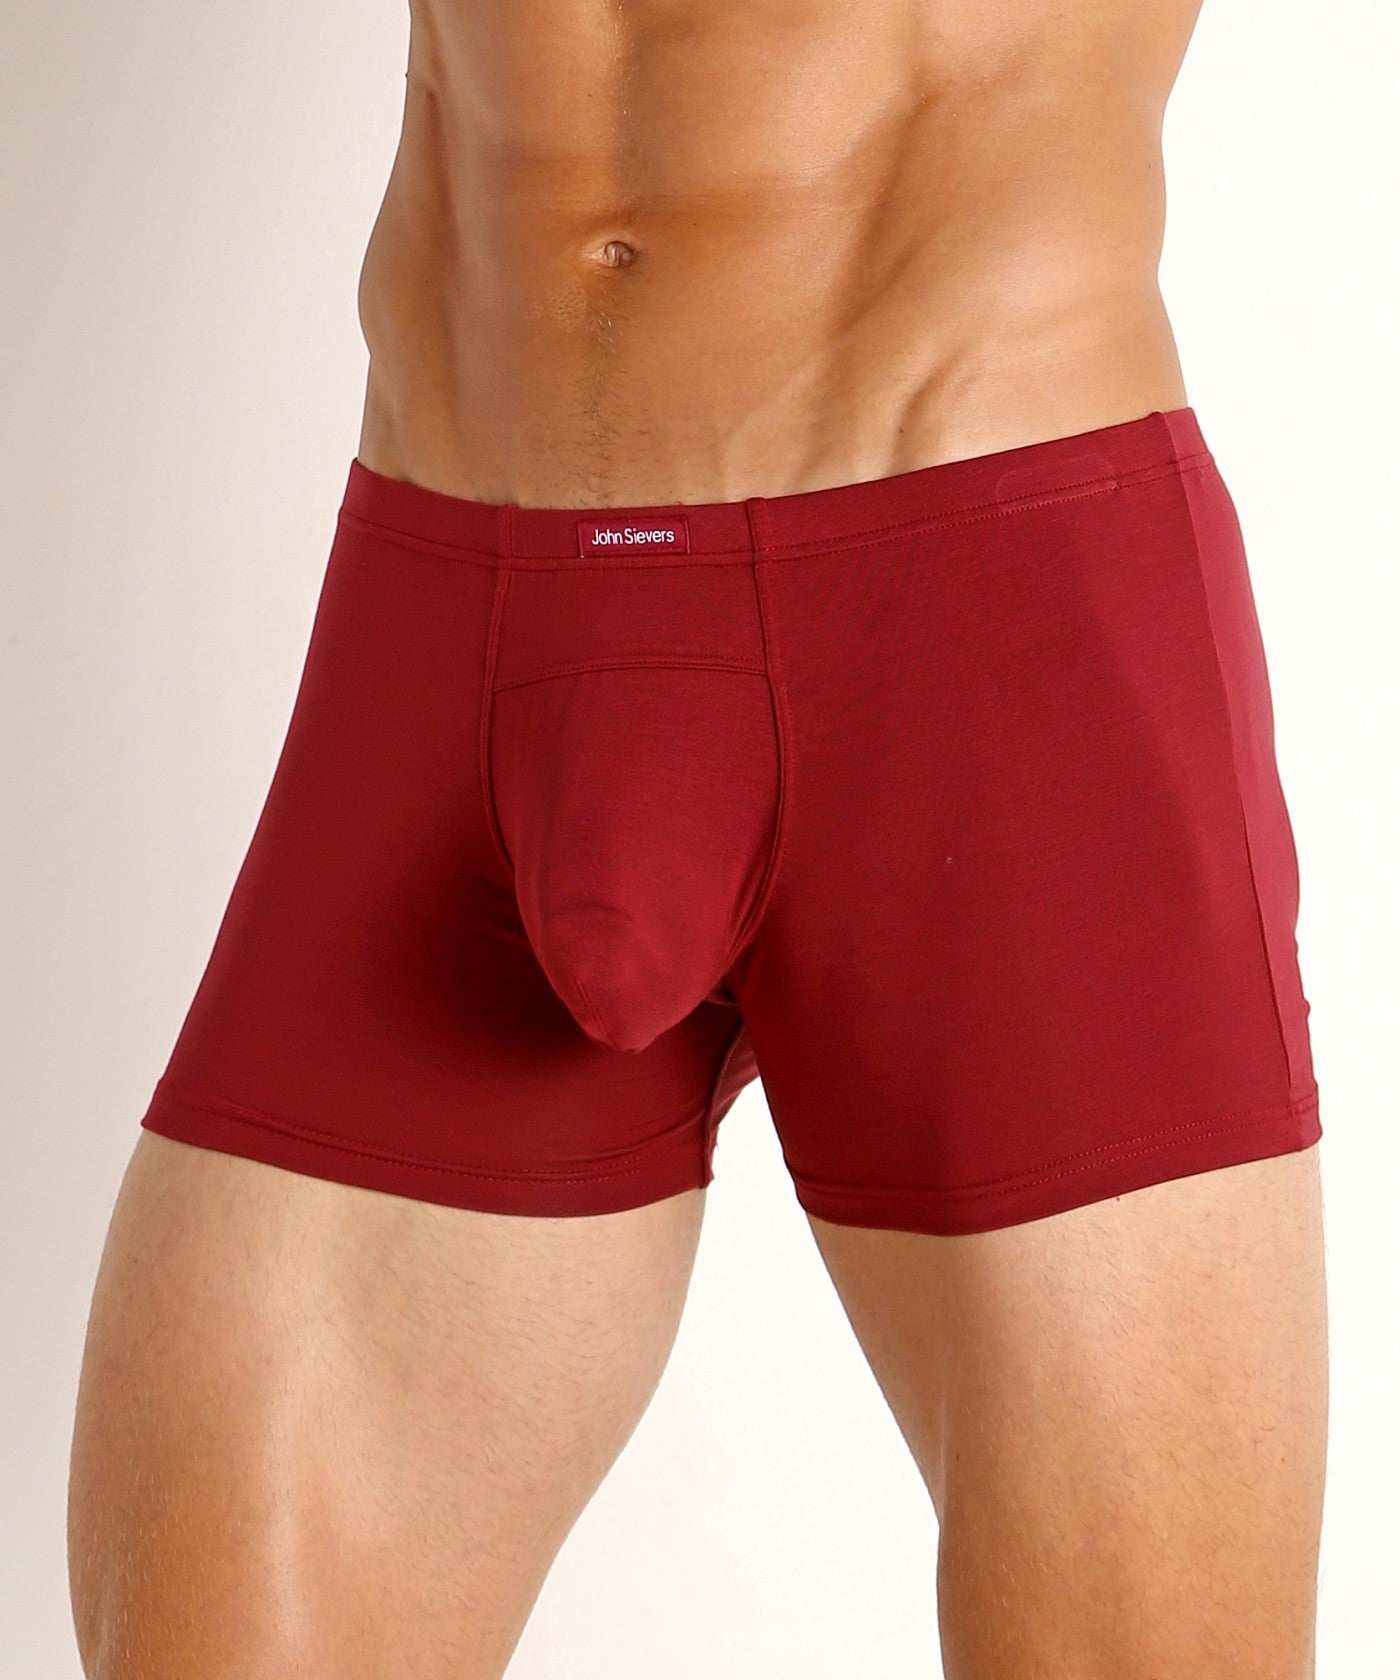 LUX NATURAL POUCH LOW RISE TRUNK - DealByEthan.gay